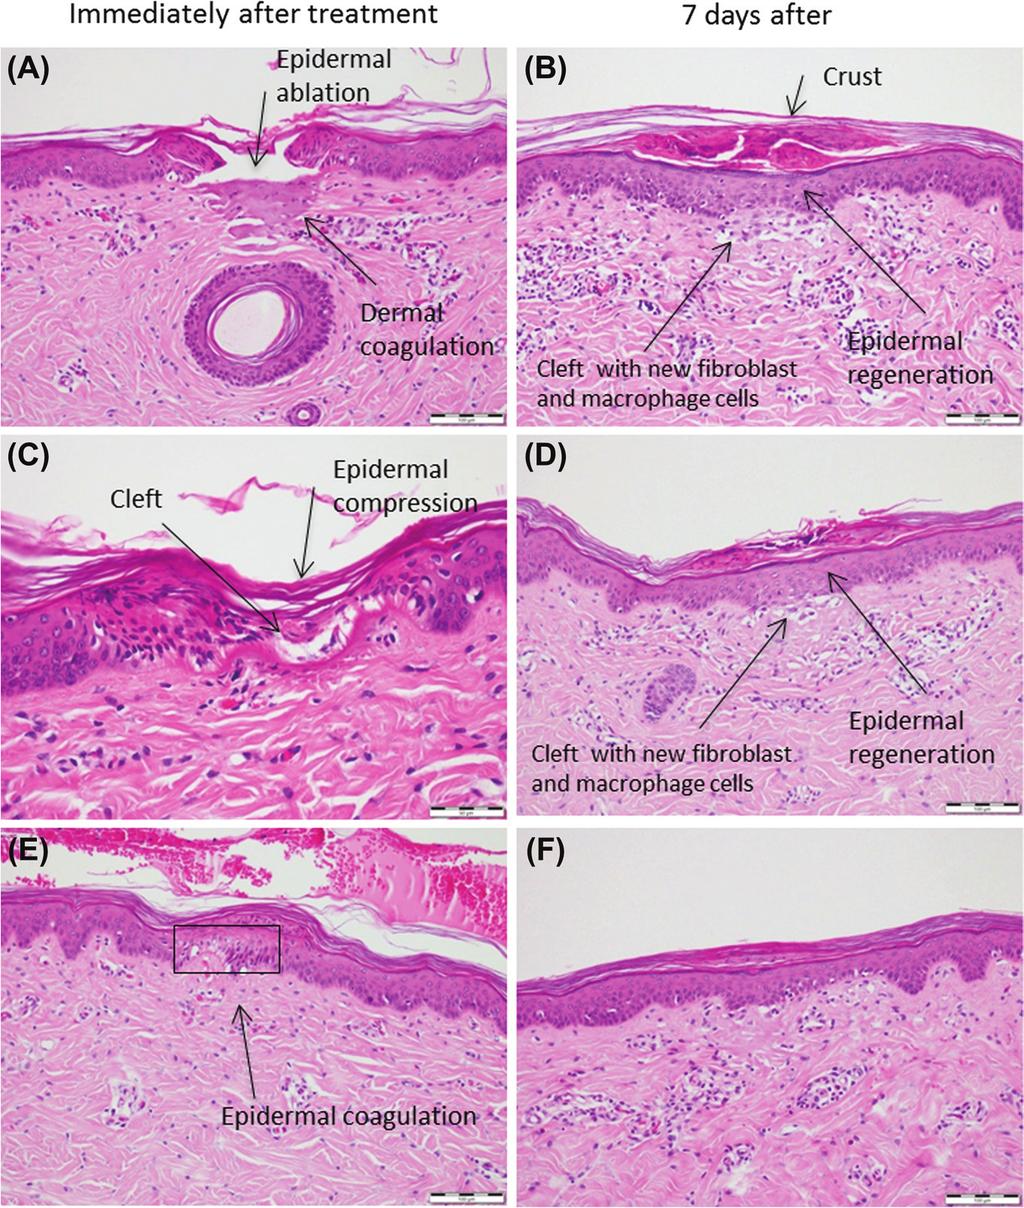 Journal of Cosmetic and Laser Therapy 5 Figure 7. Tixel histologies with S tip on in vivo porcine skin immediately after and 7 days after treatment.